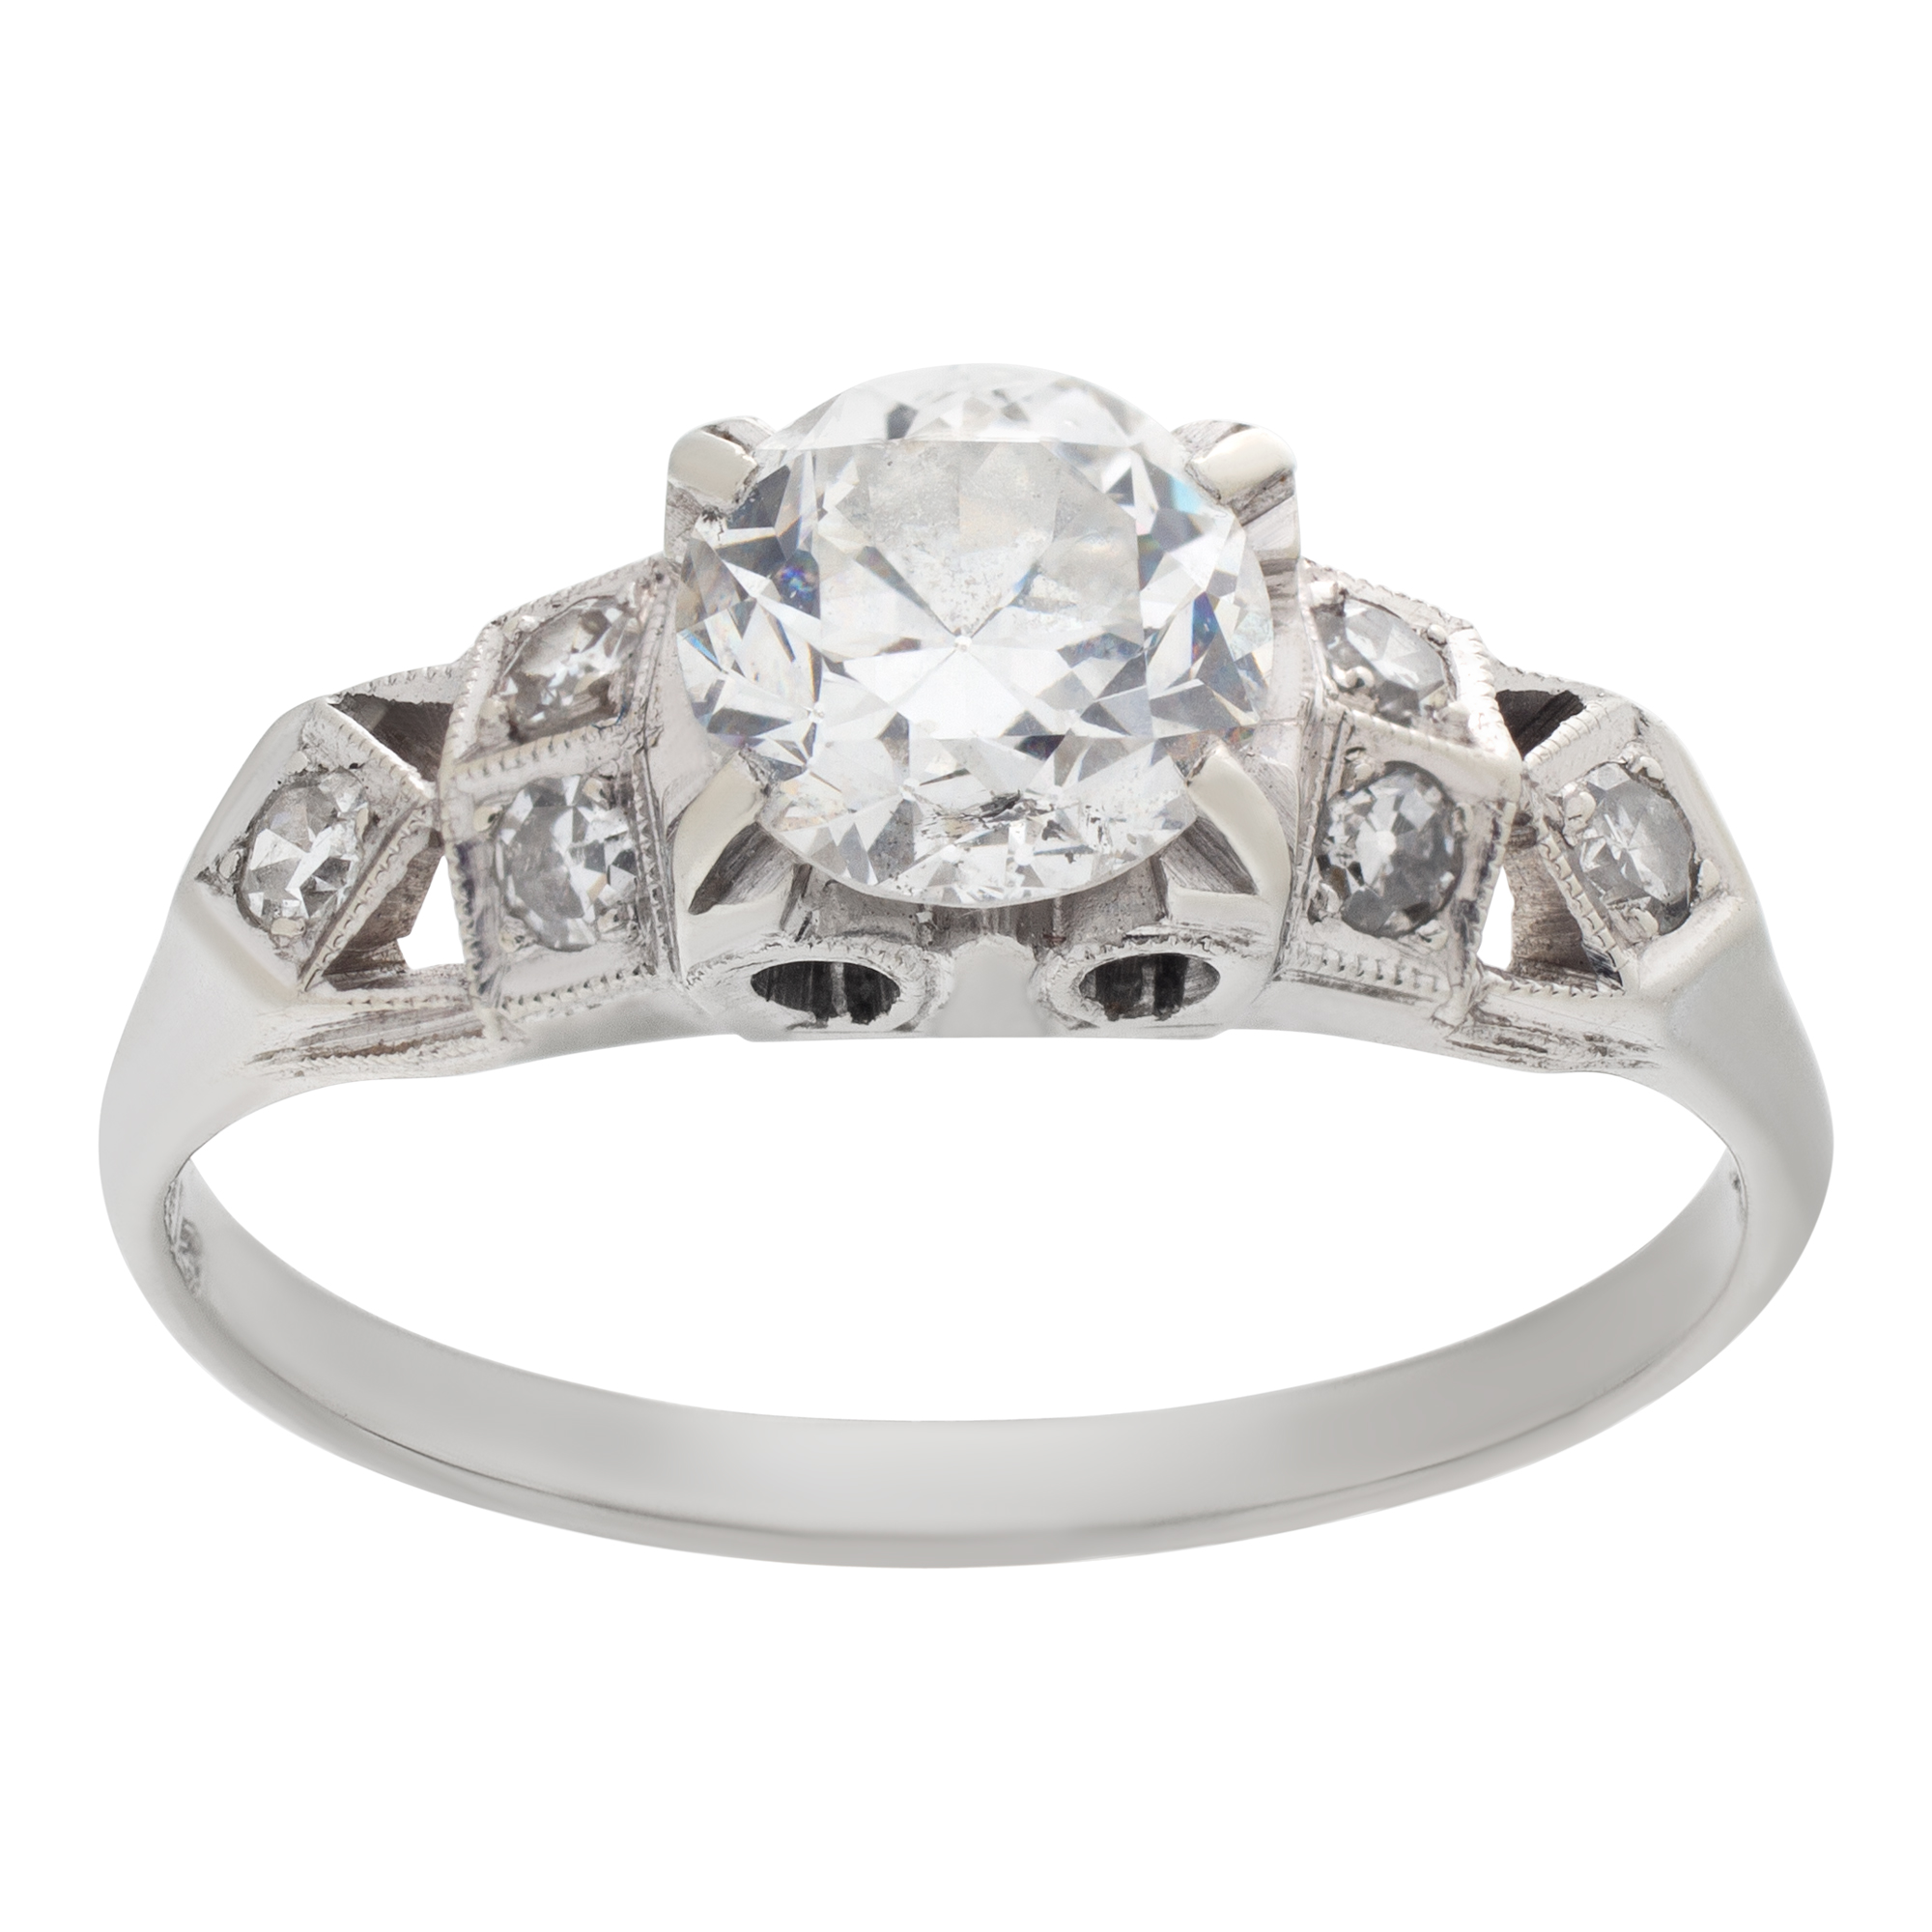 Charming diamond engagement ring in 18k white gold with an app. 0.60 carat center European cut round diamond image 1